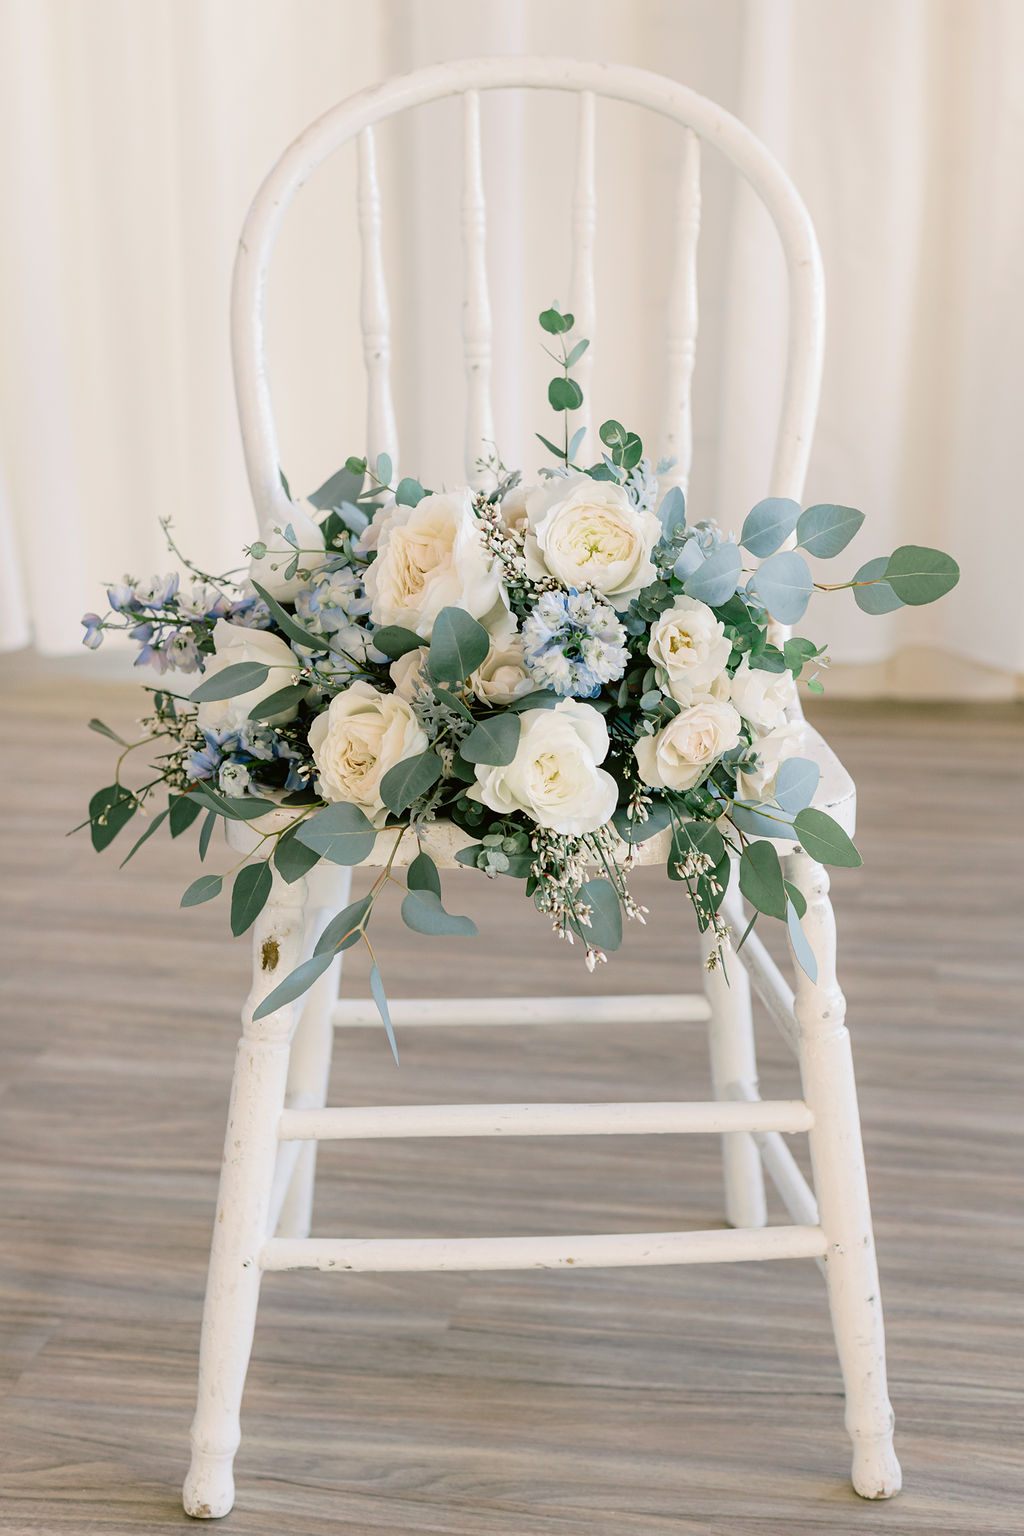 White and light blue wedding bouquet on vintage white chair